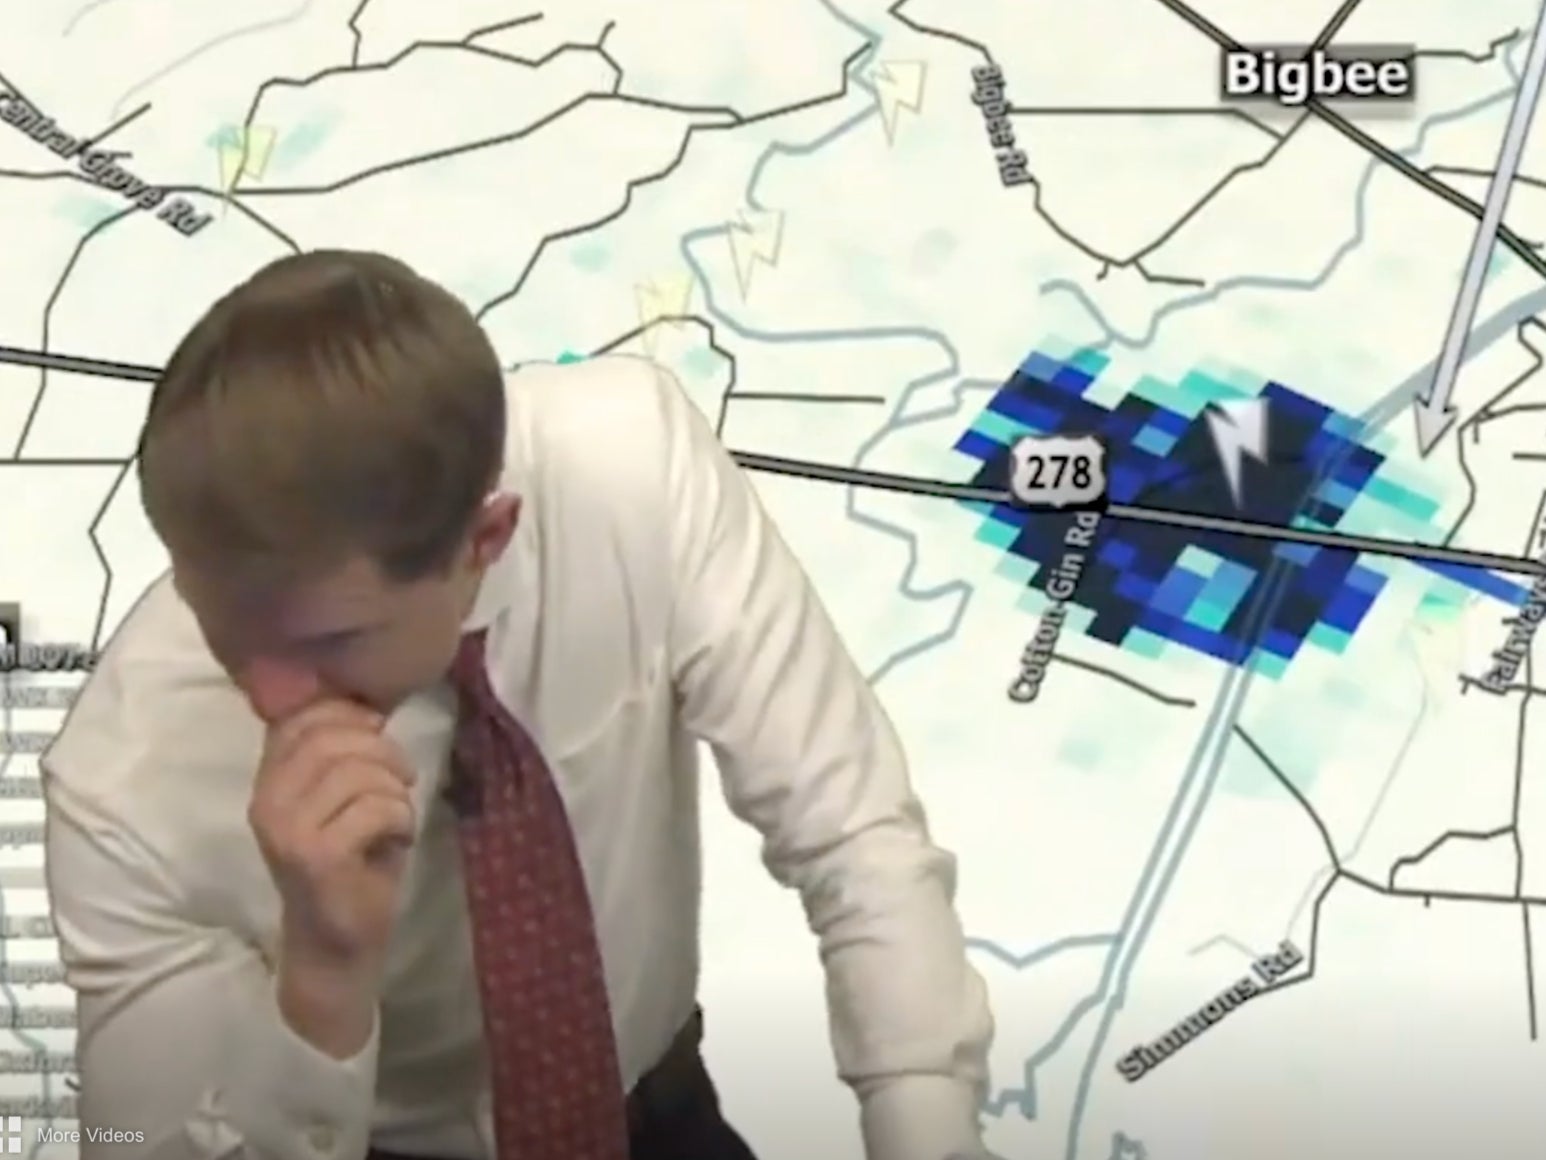 Matt Laubhan, chief meteorologist for local TV station WTVA, struggled to contain his emotions as he gave a report of the tornado heading towards the town of Amory